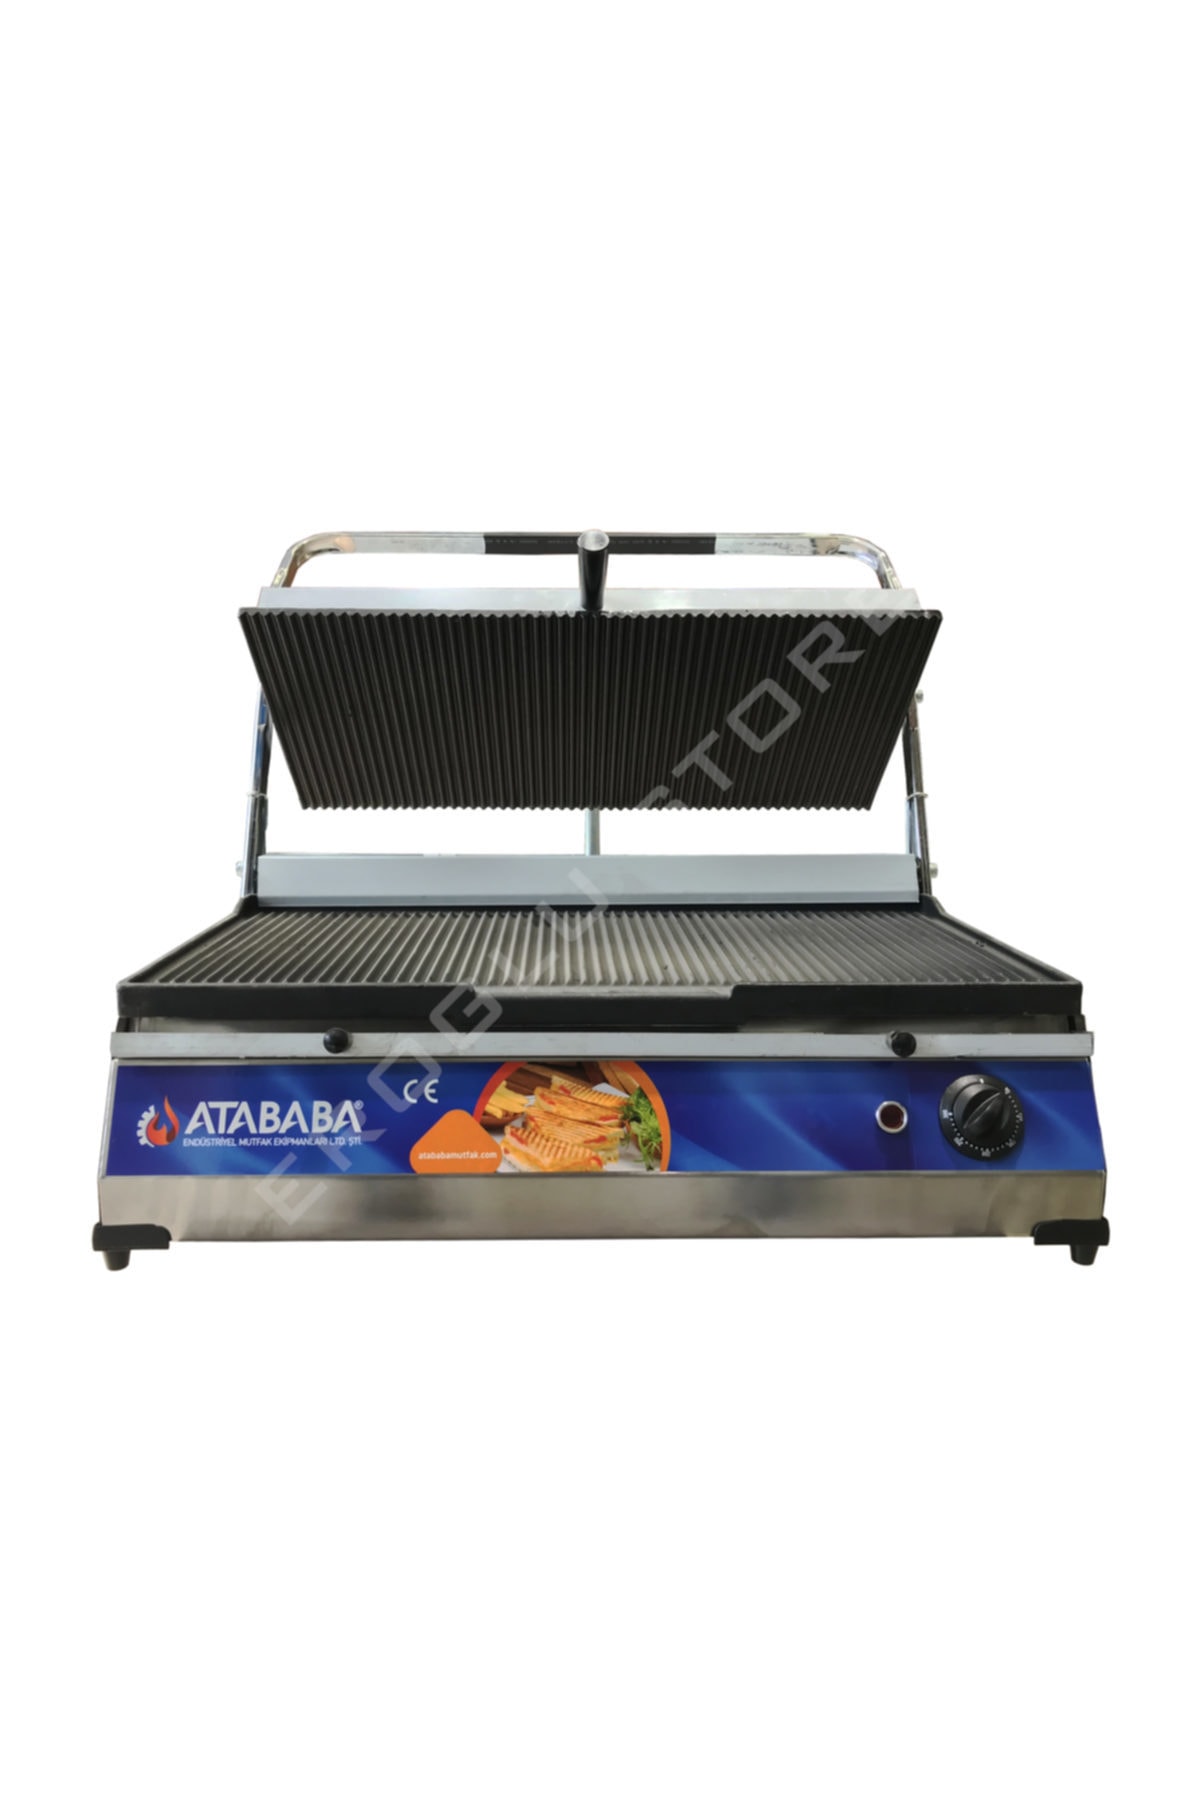 Atababa 24 Dilim 2500 W Tost Makinesi